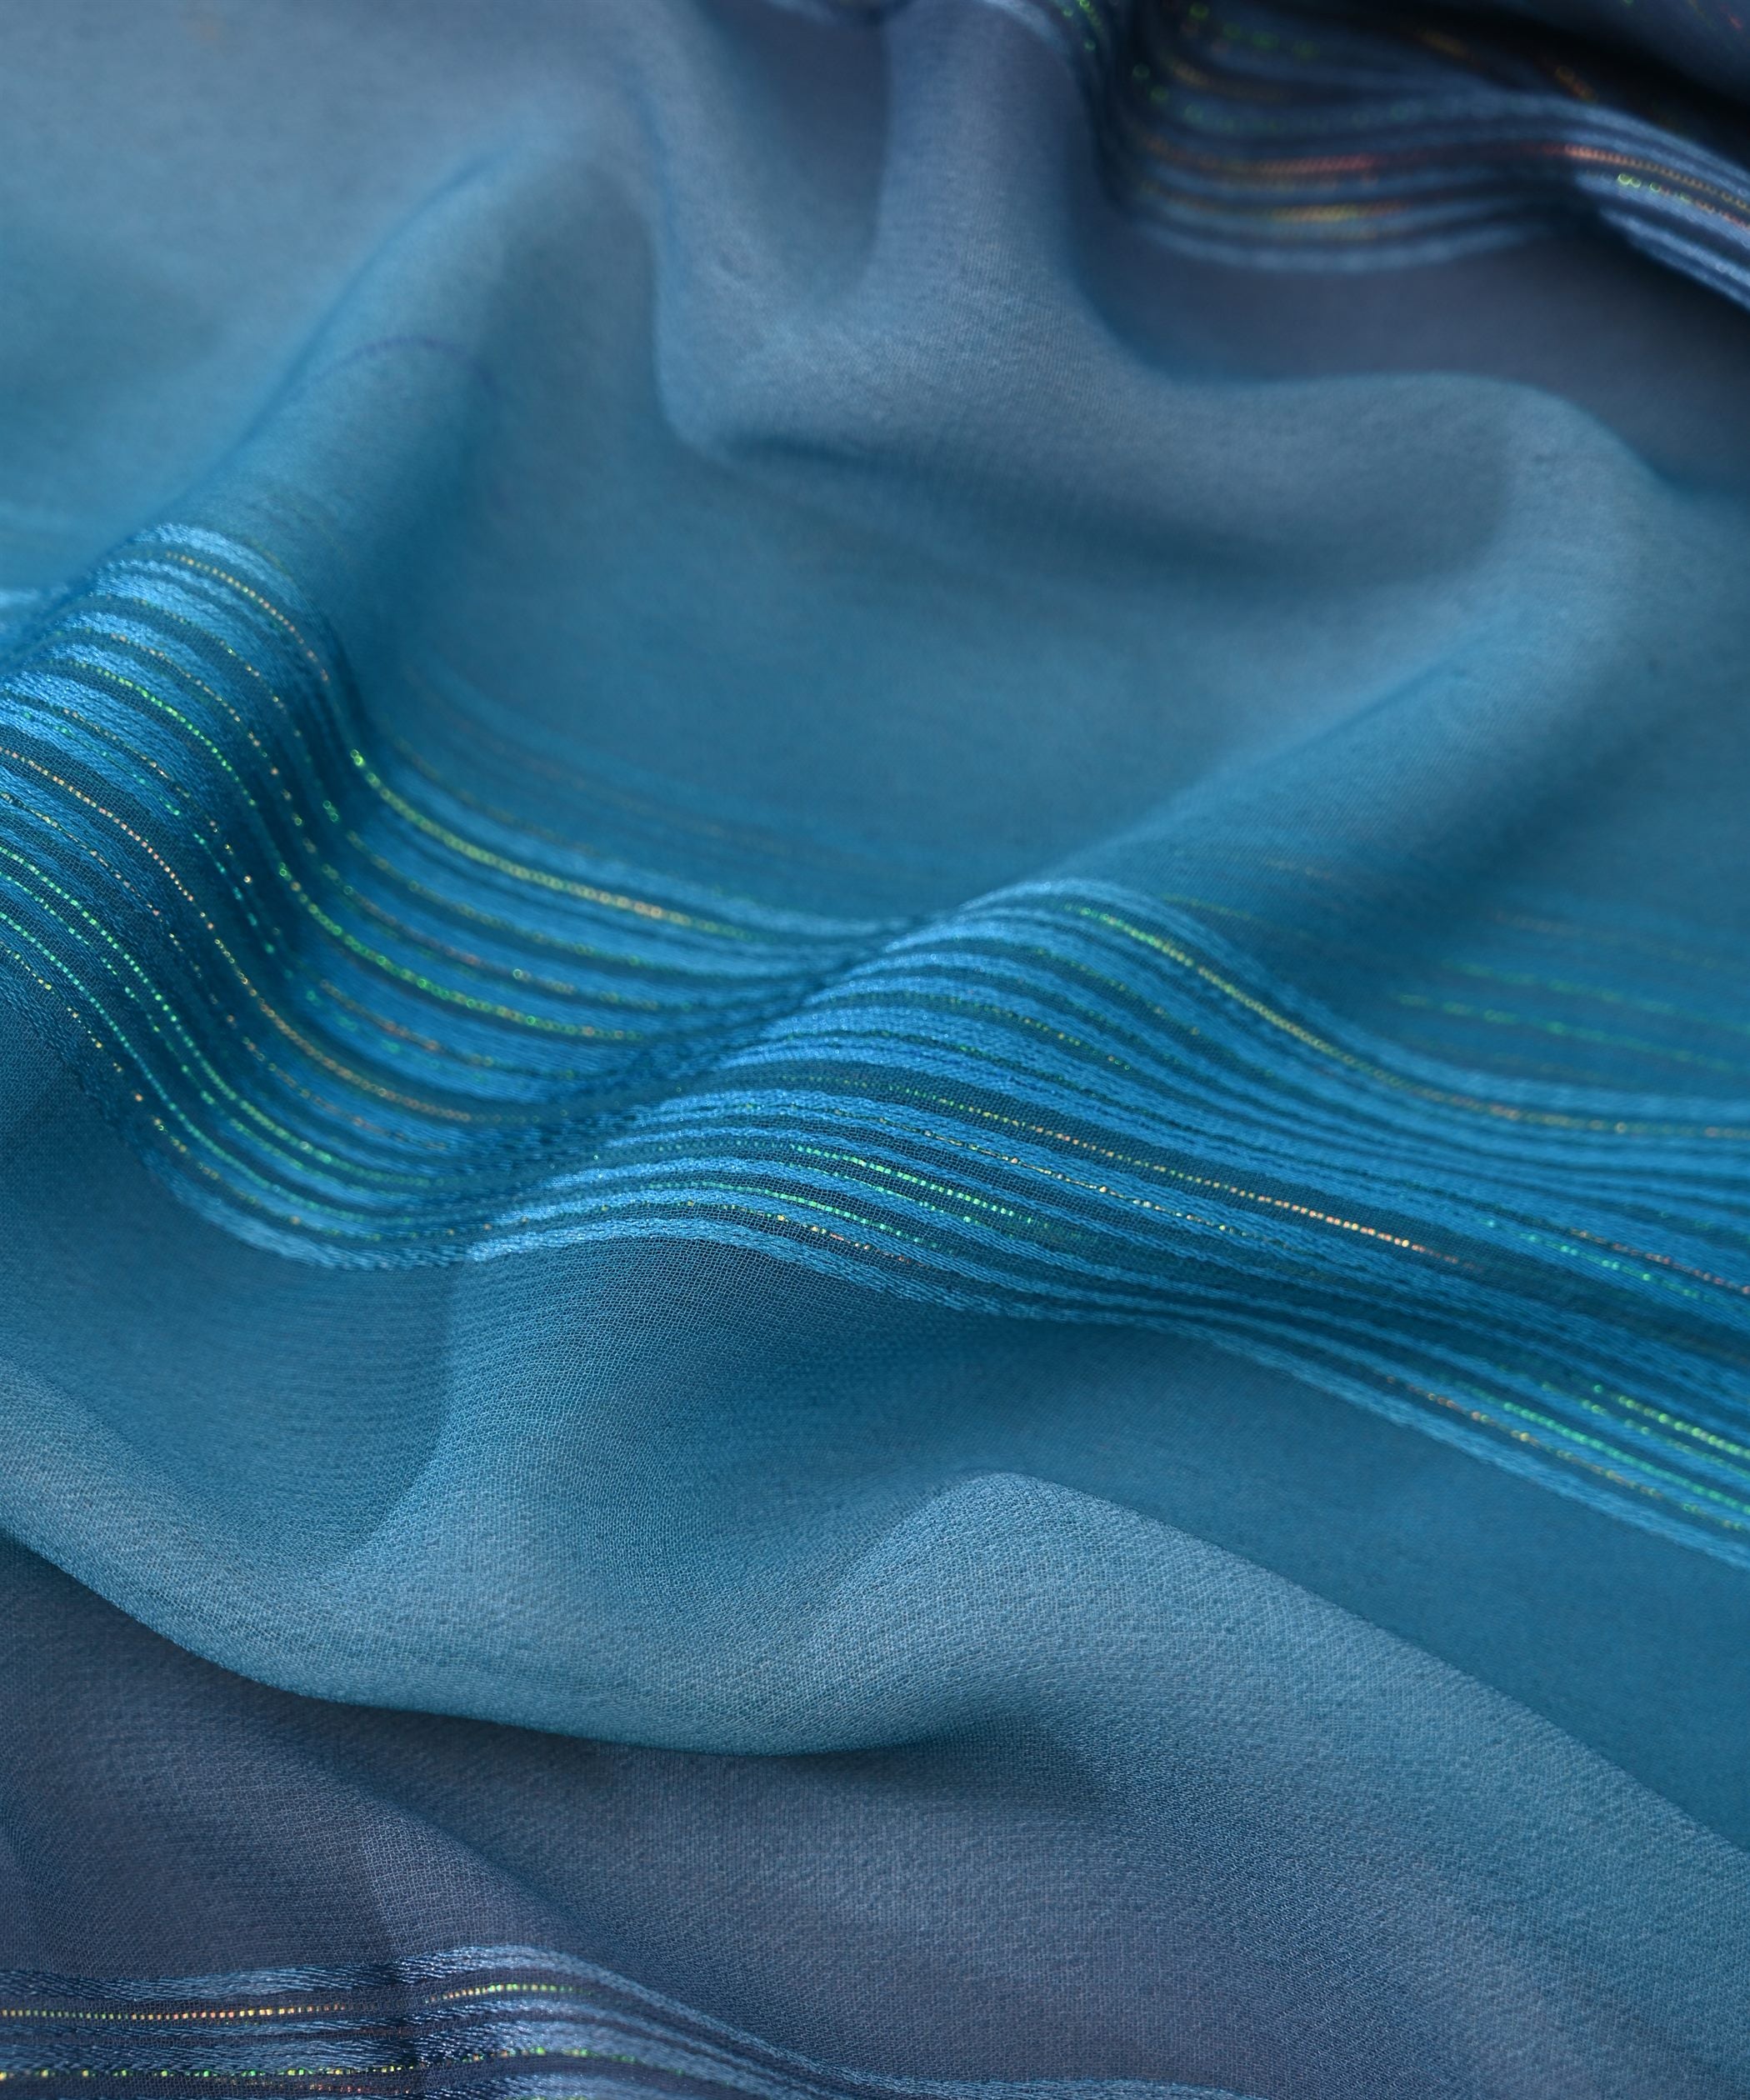 Blue Multi-colored Georgette Fabric with Satin Stripes